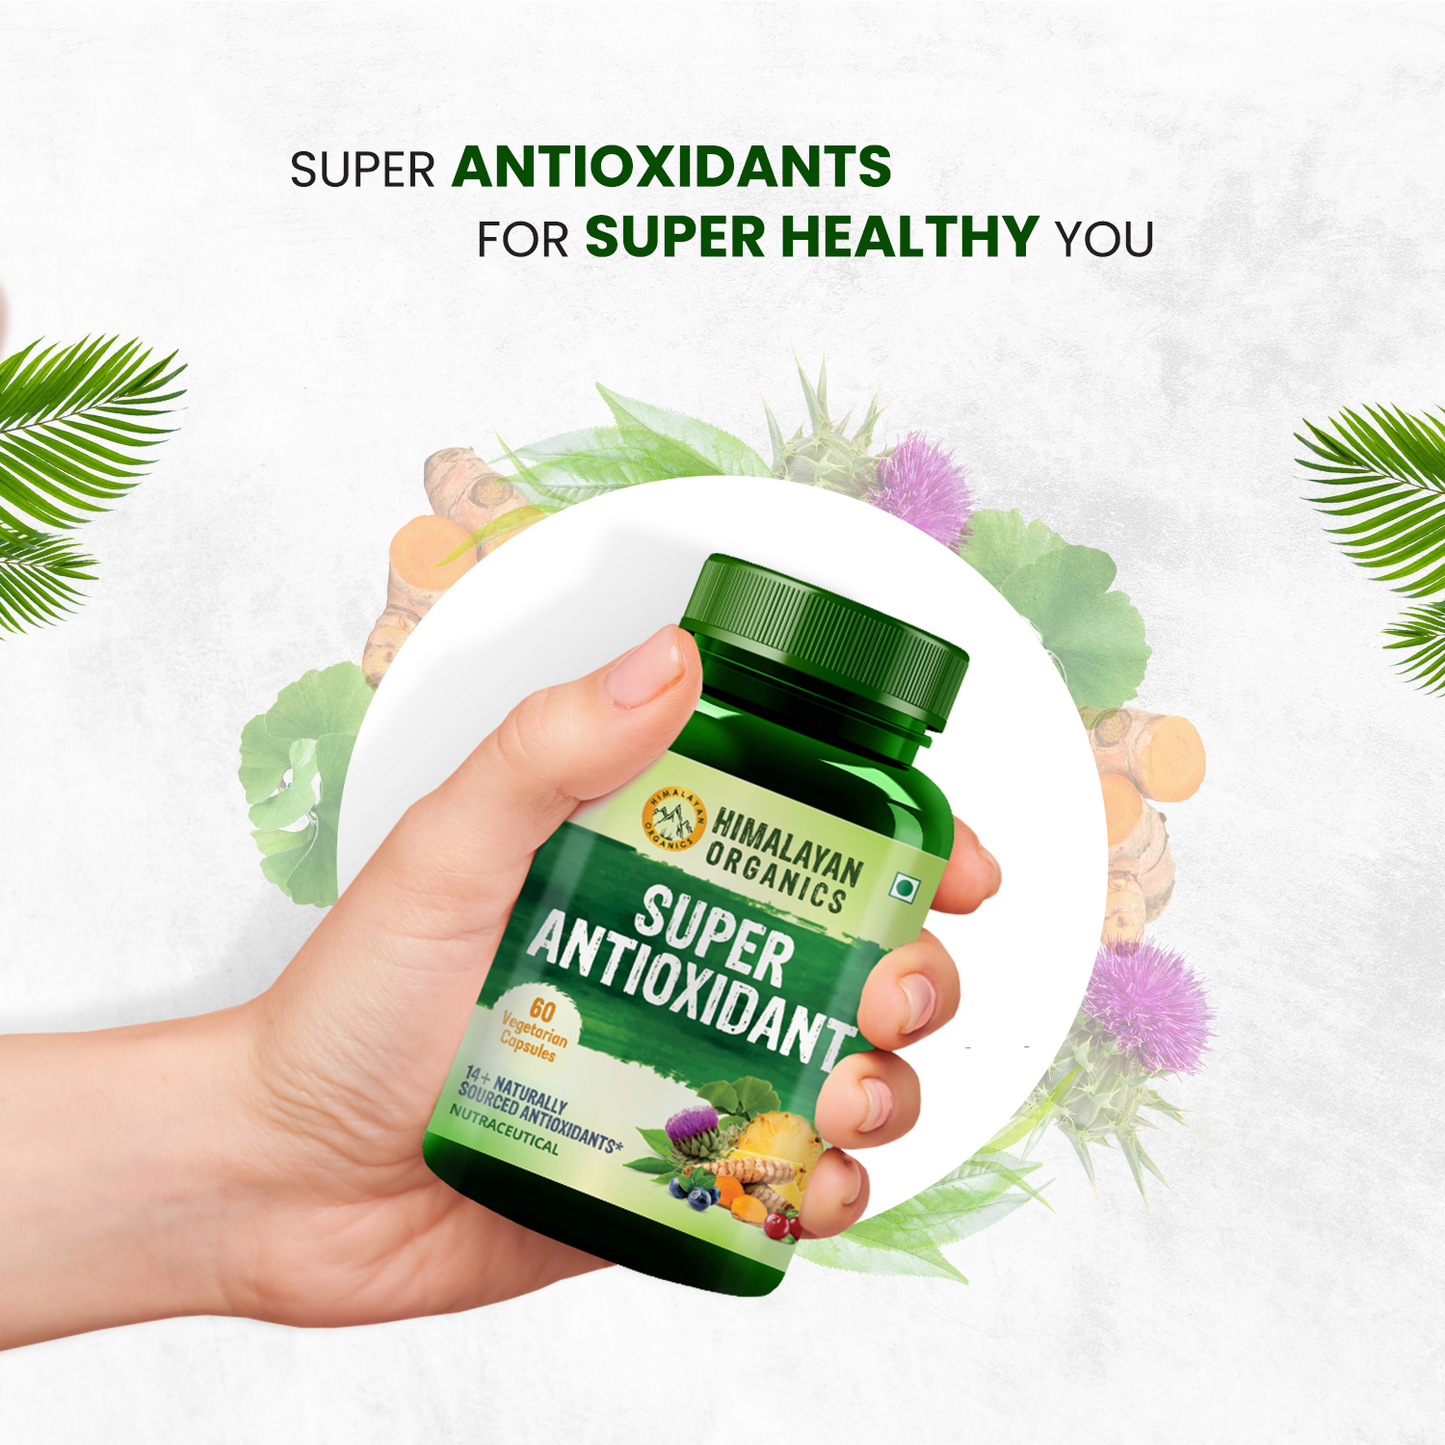 Himalayan Organics Super Antioxidant Supplement | Powerhouse of Antioxidant for Overall Health (60 Capsules)